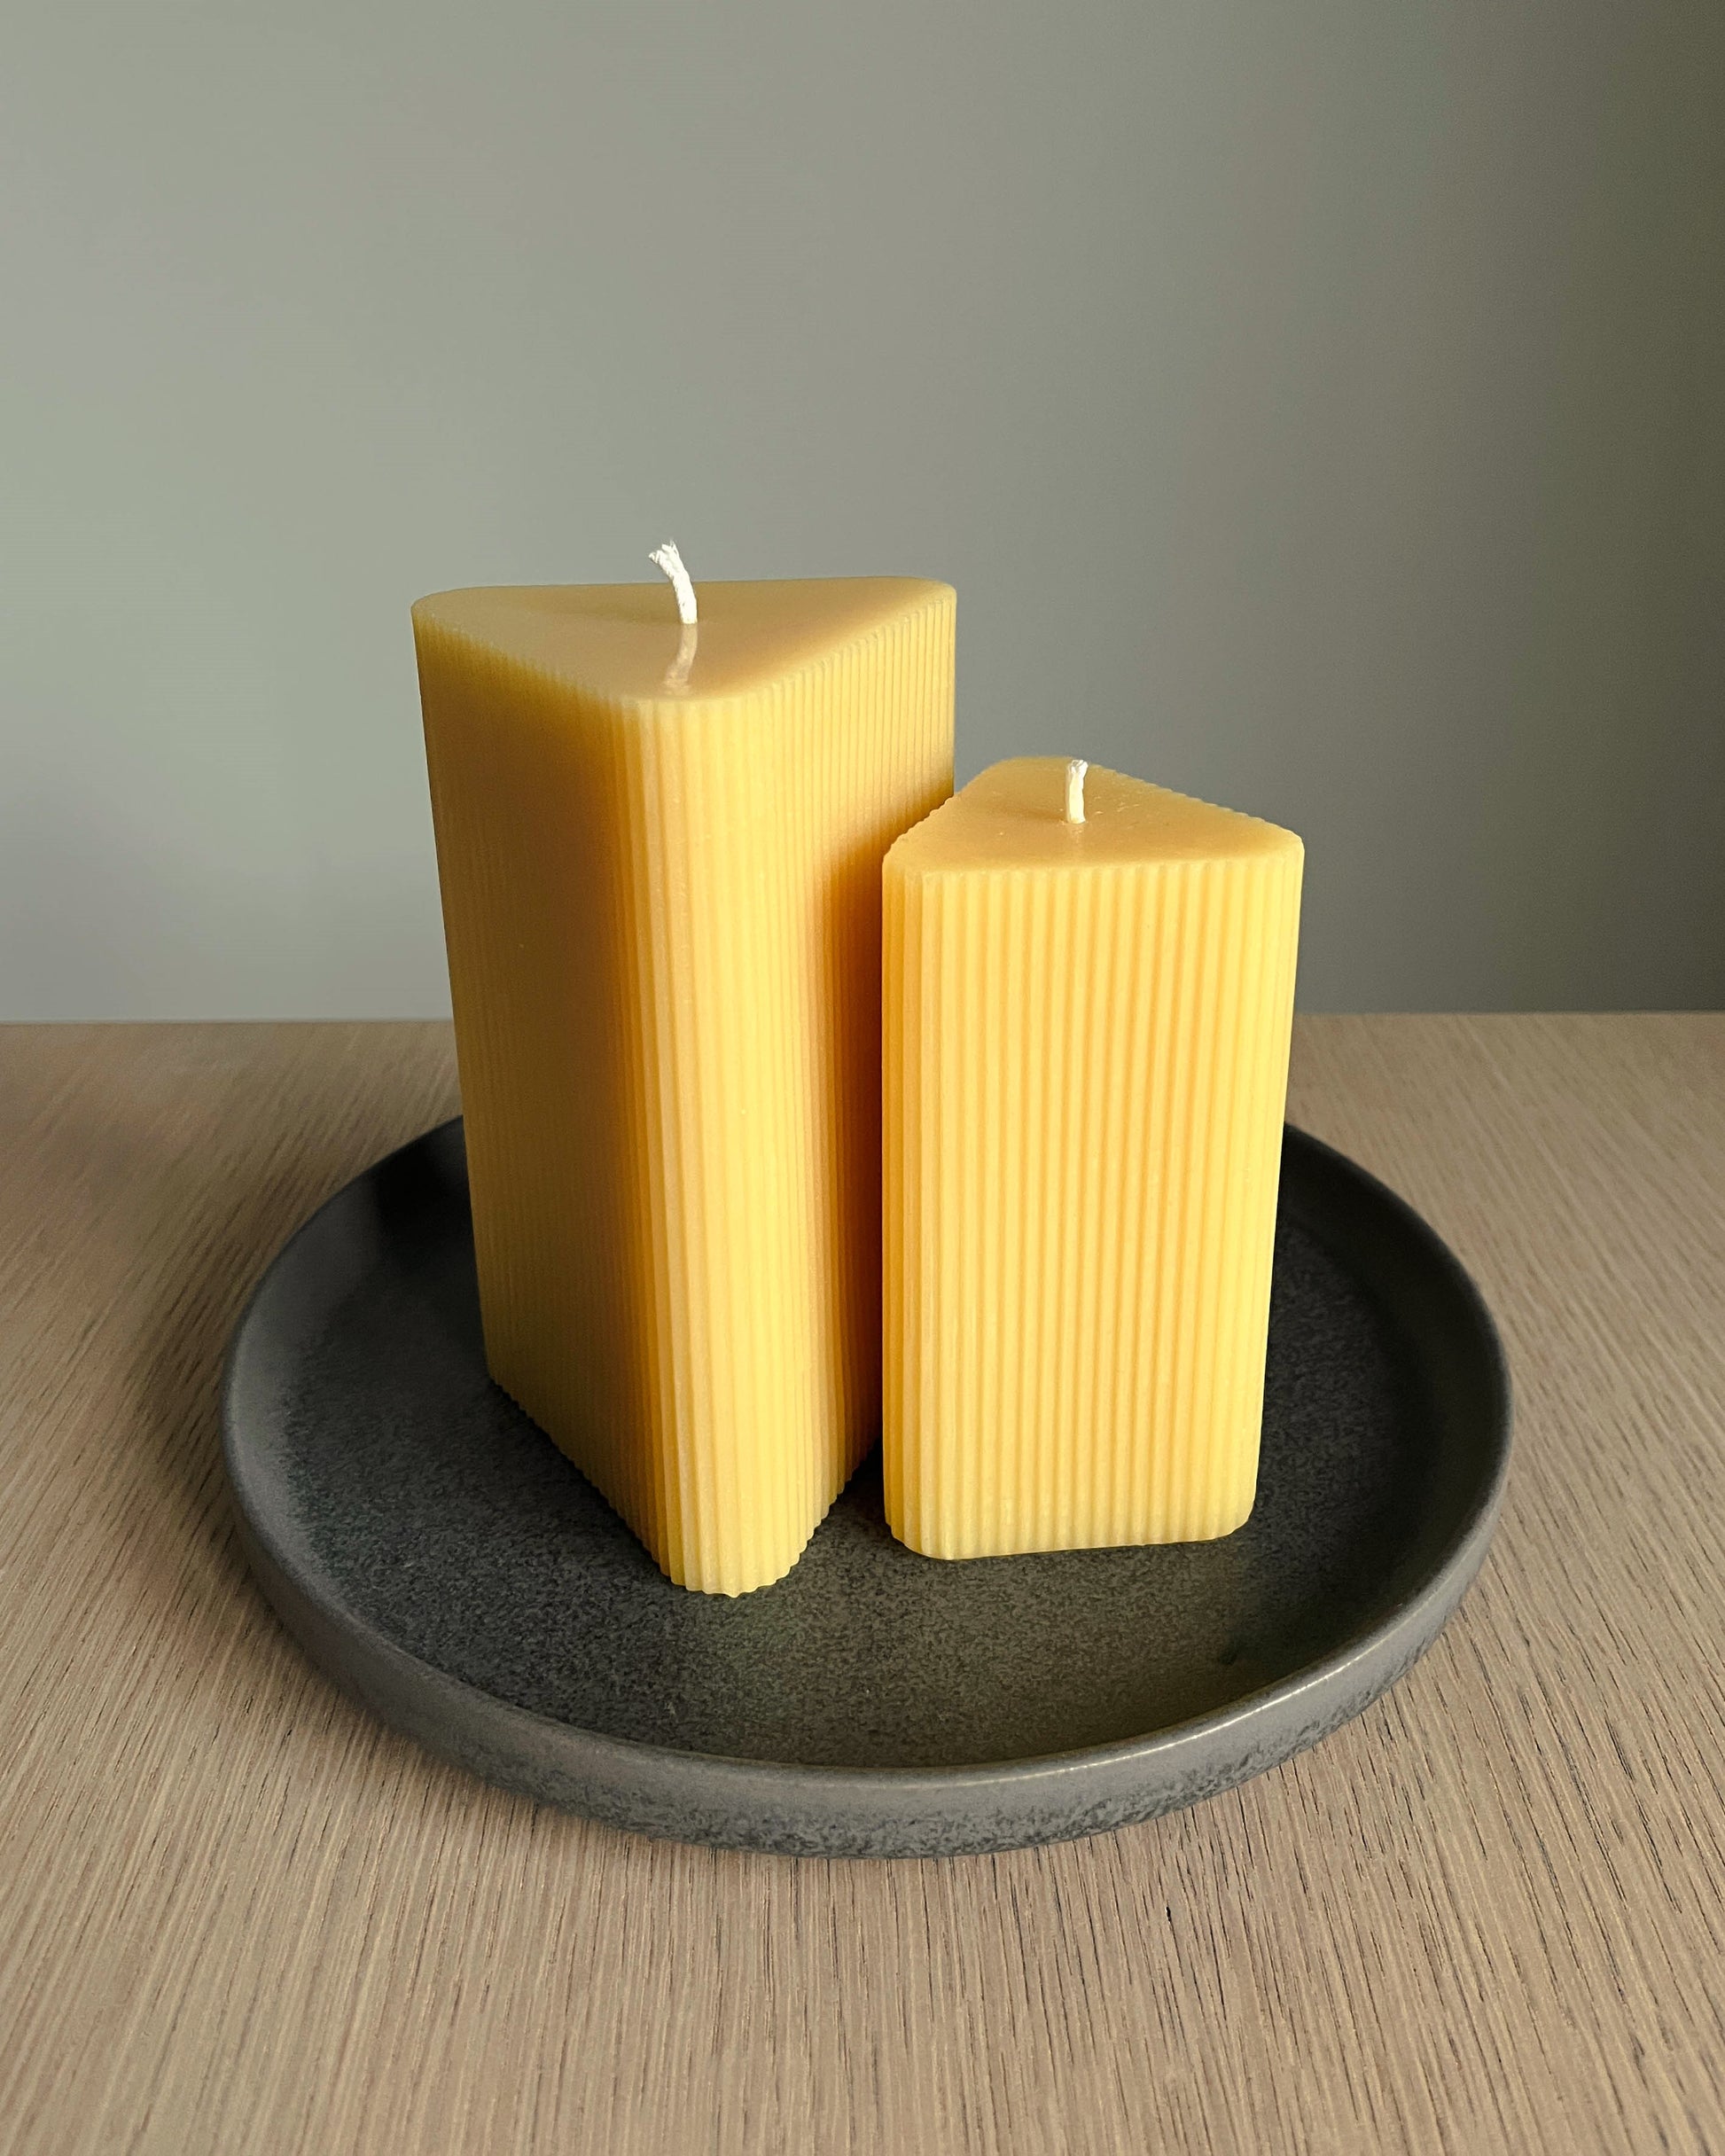 Square White Beeswax Spiral Candle